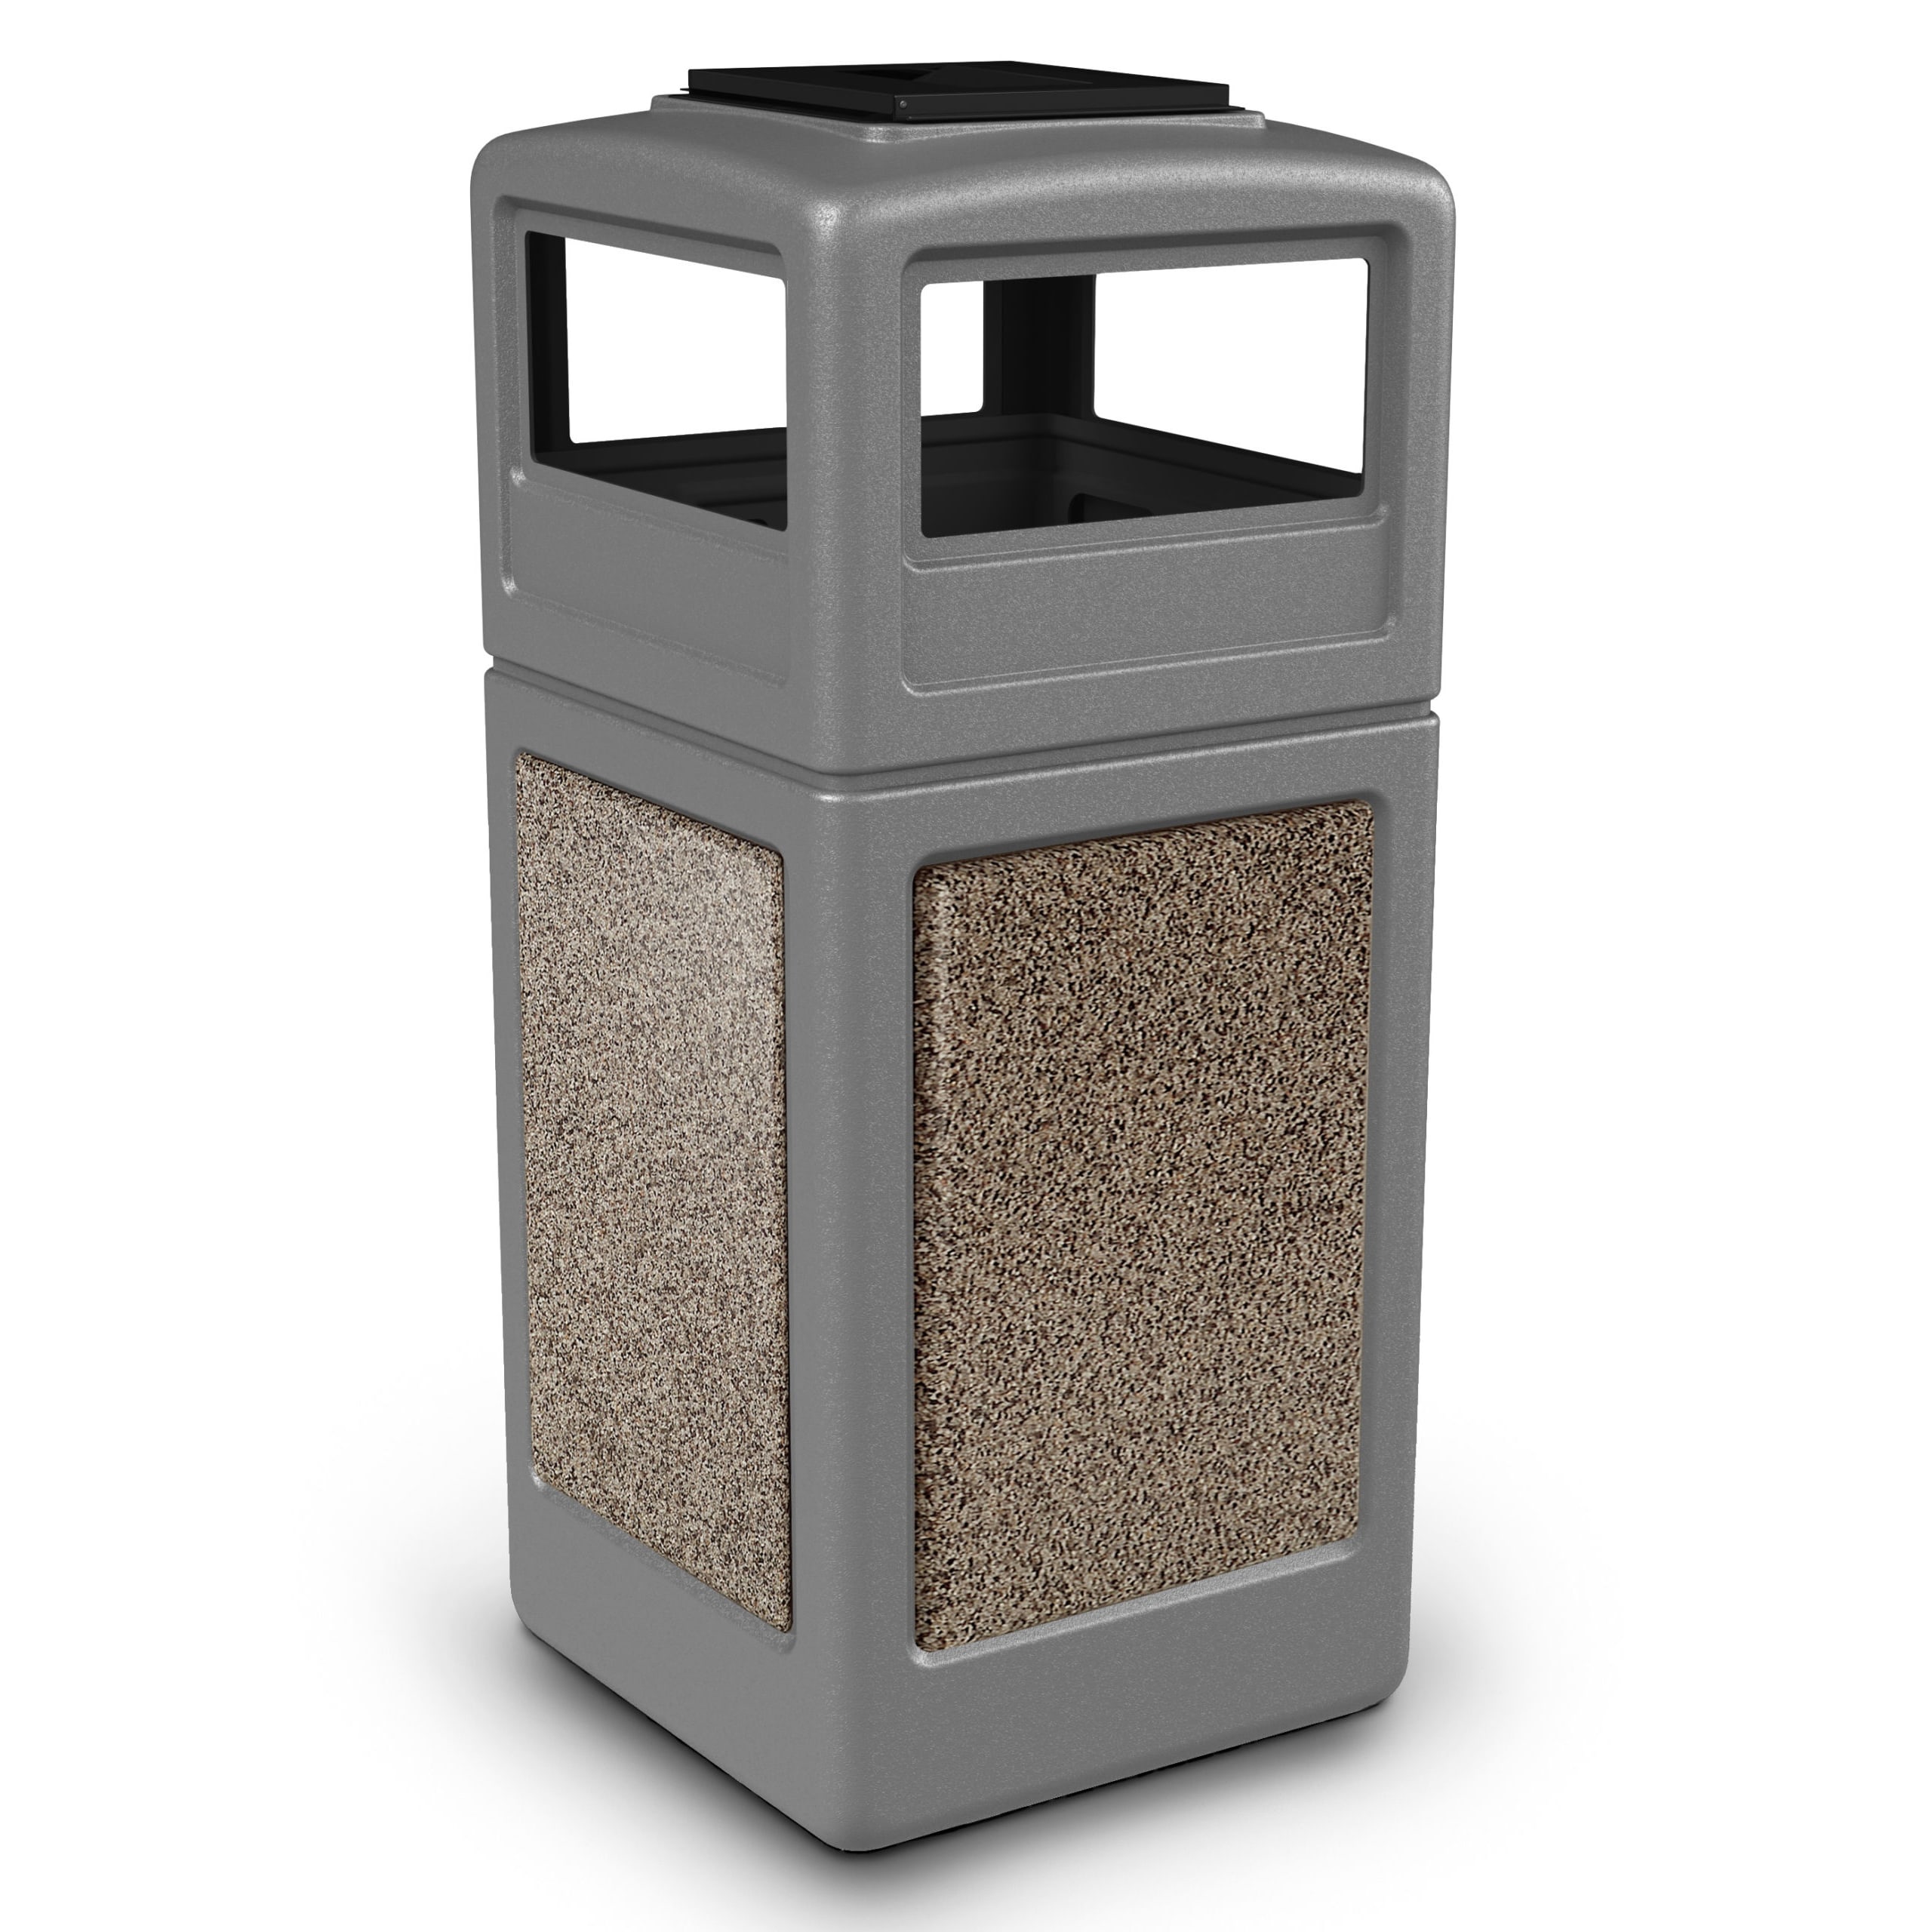 https://www.commercialzone.com/wp-content/uploads/2022/09/720545K-StoneTec-Series-42-Gallon-Square-Waste-Receptacle-with-Ashtray-Dome-Lid-Gray-Riverstone-scaled-1.jpg